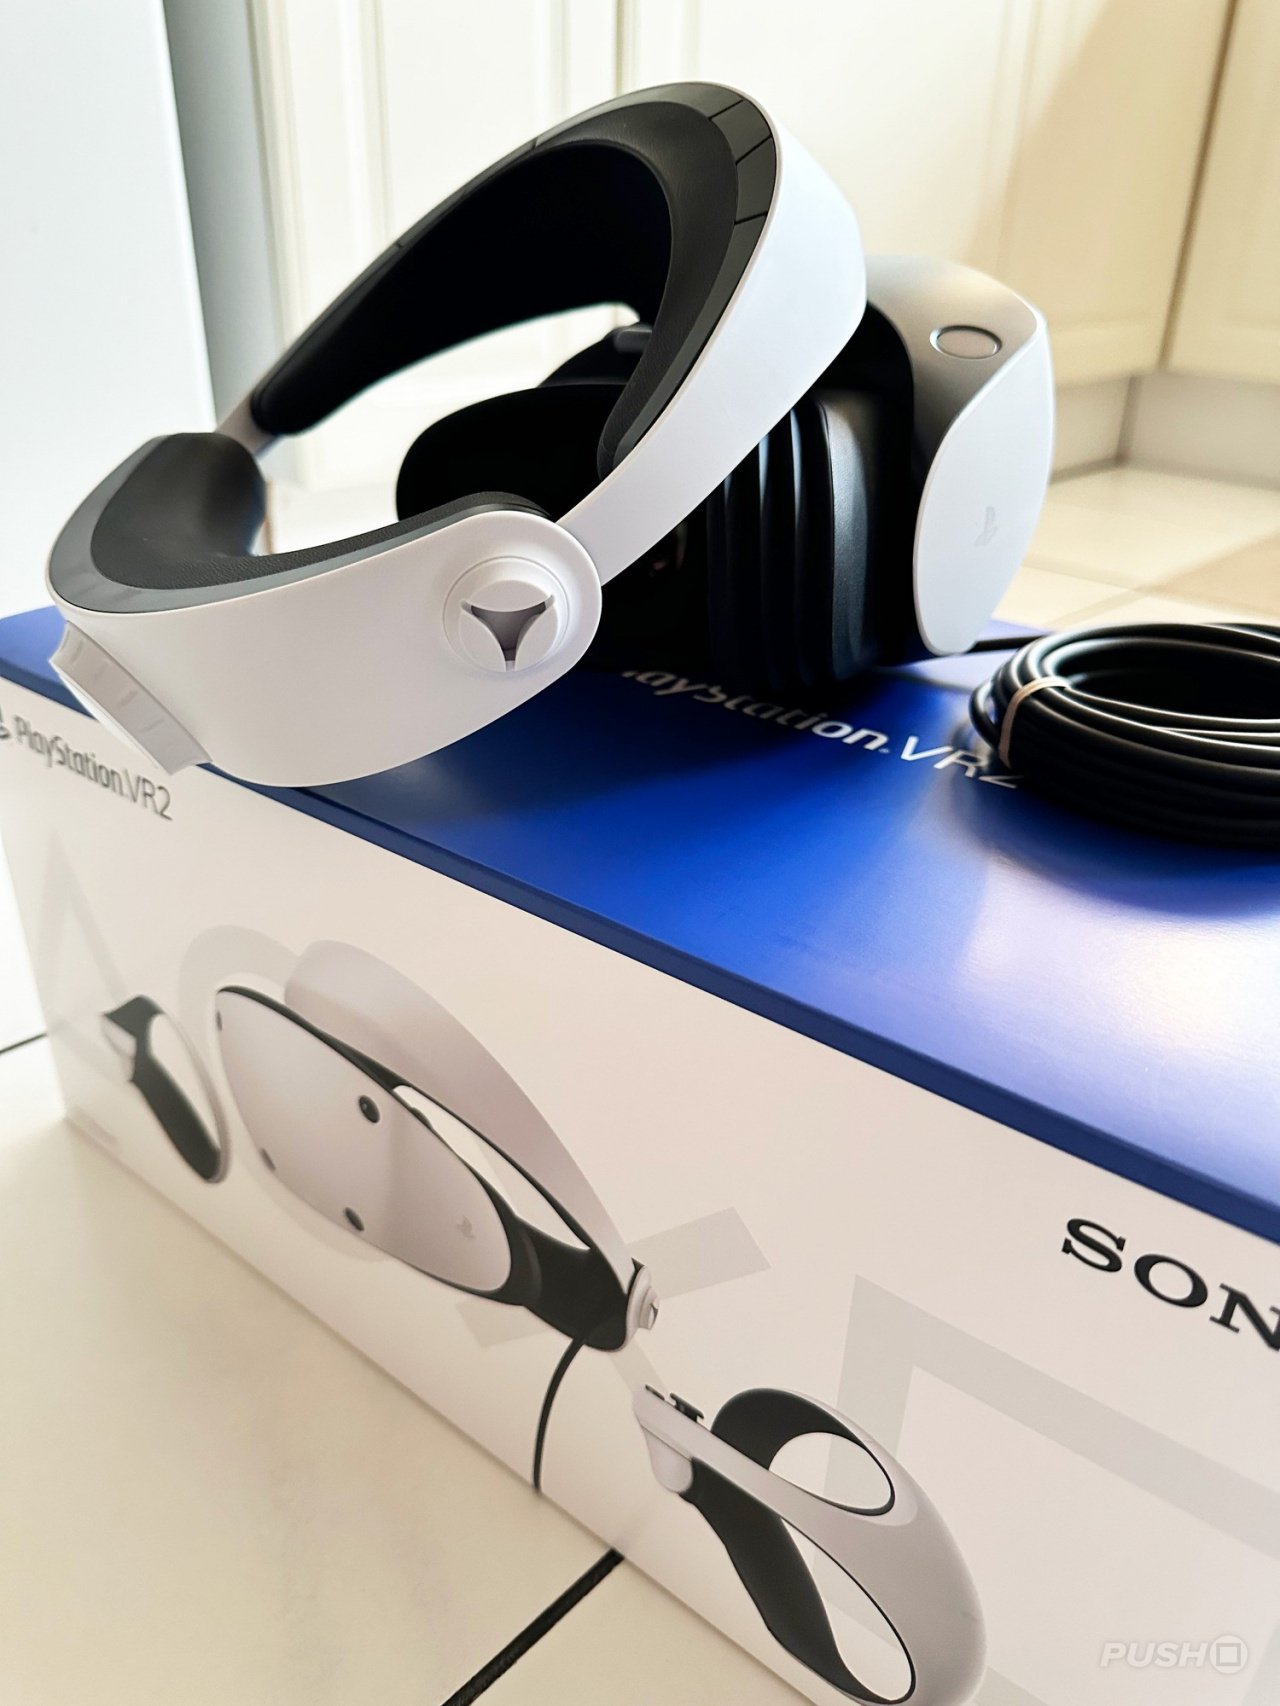 Playstation VR2 - Unboxing & First Impressions of the PS VR2! 